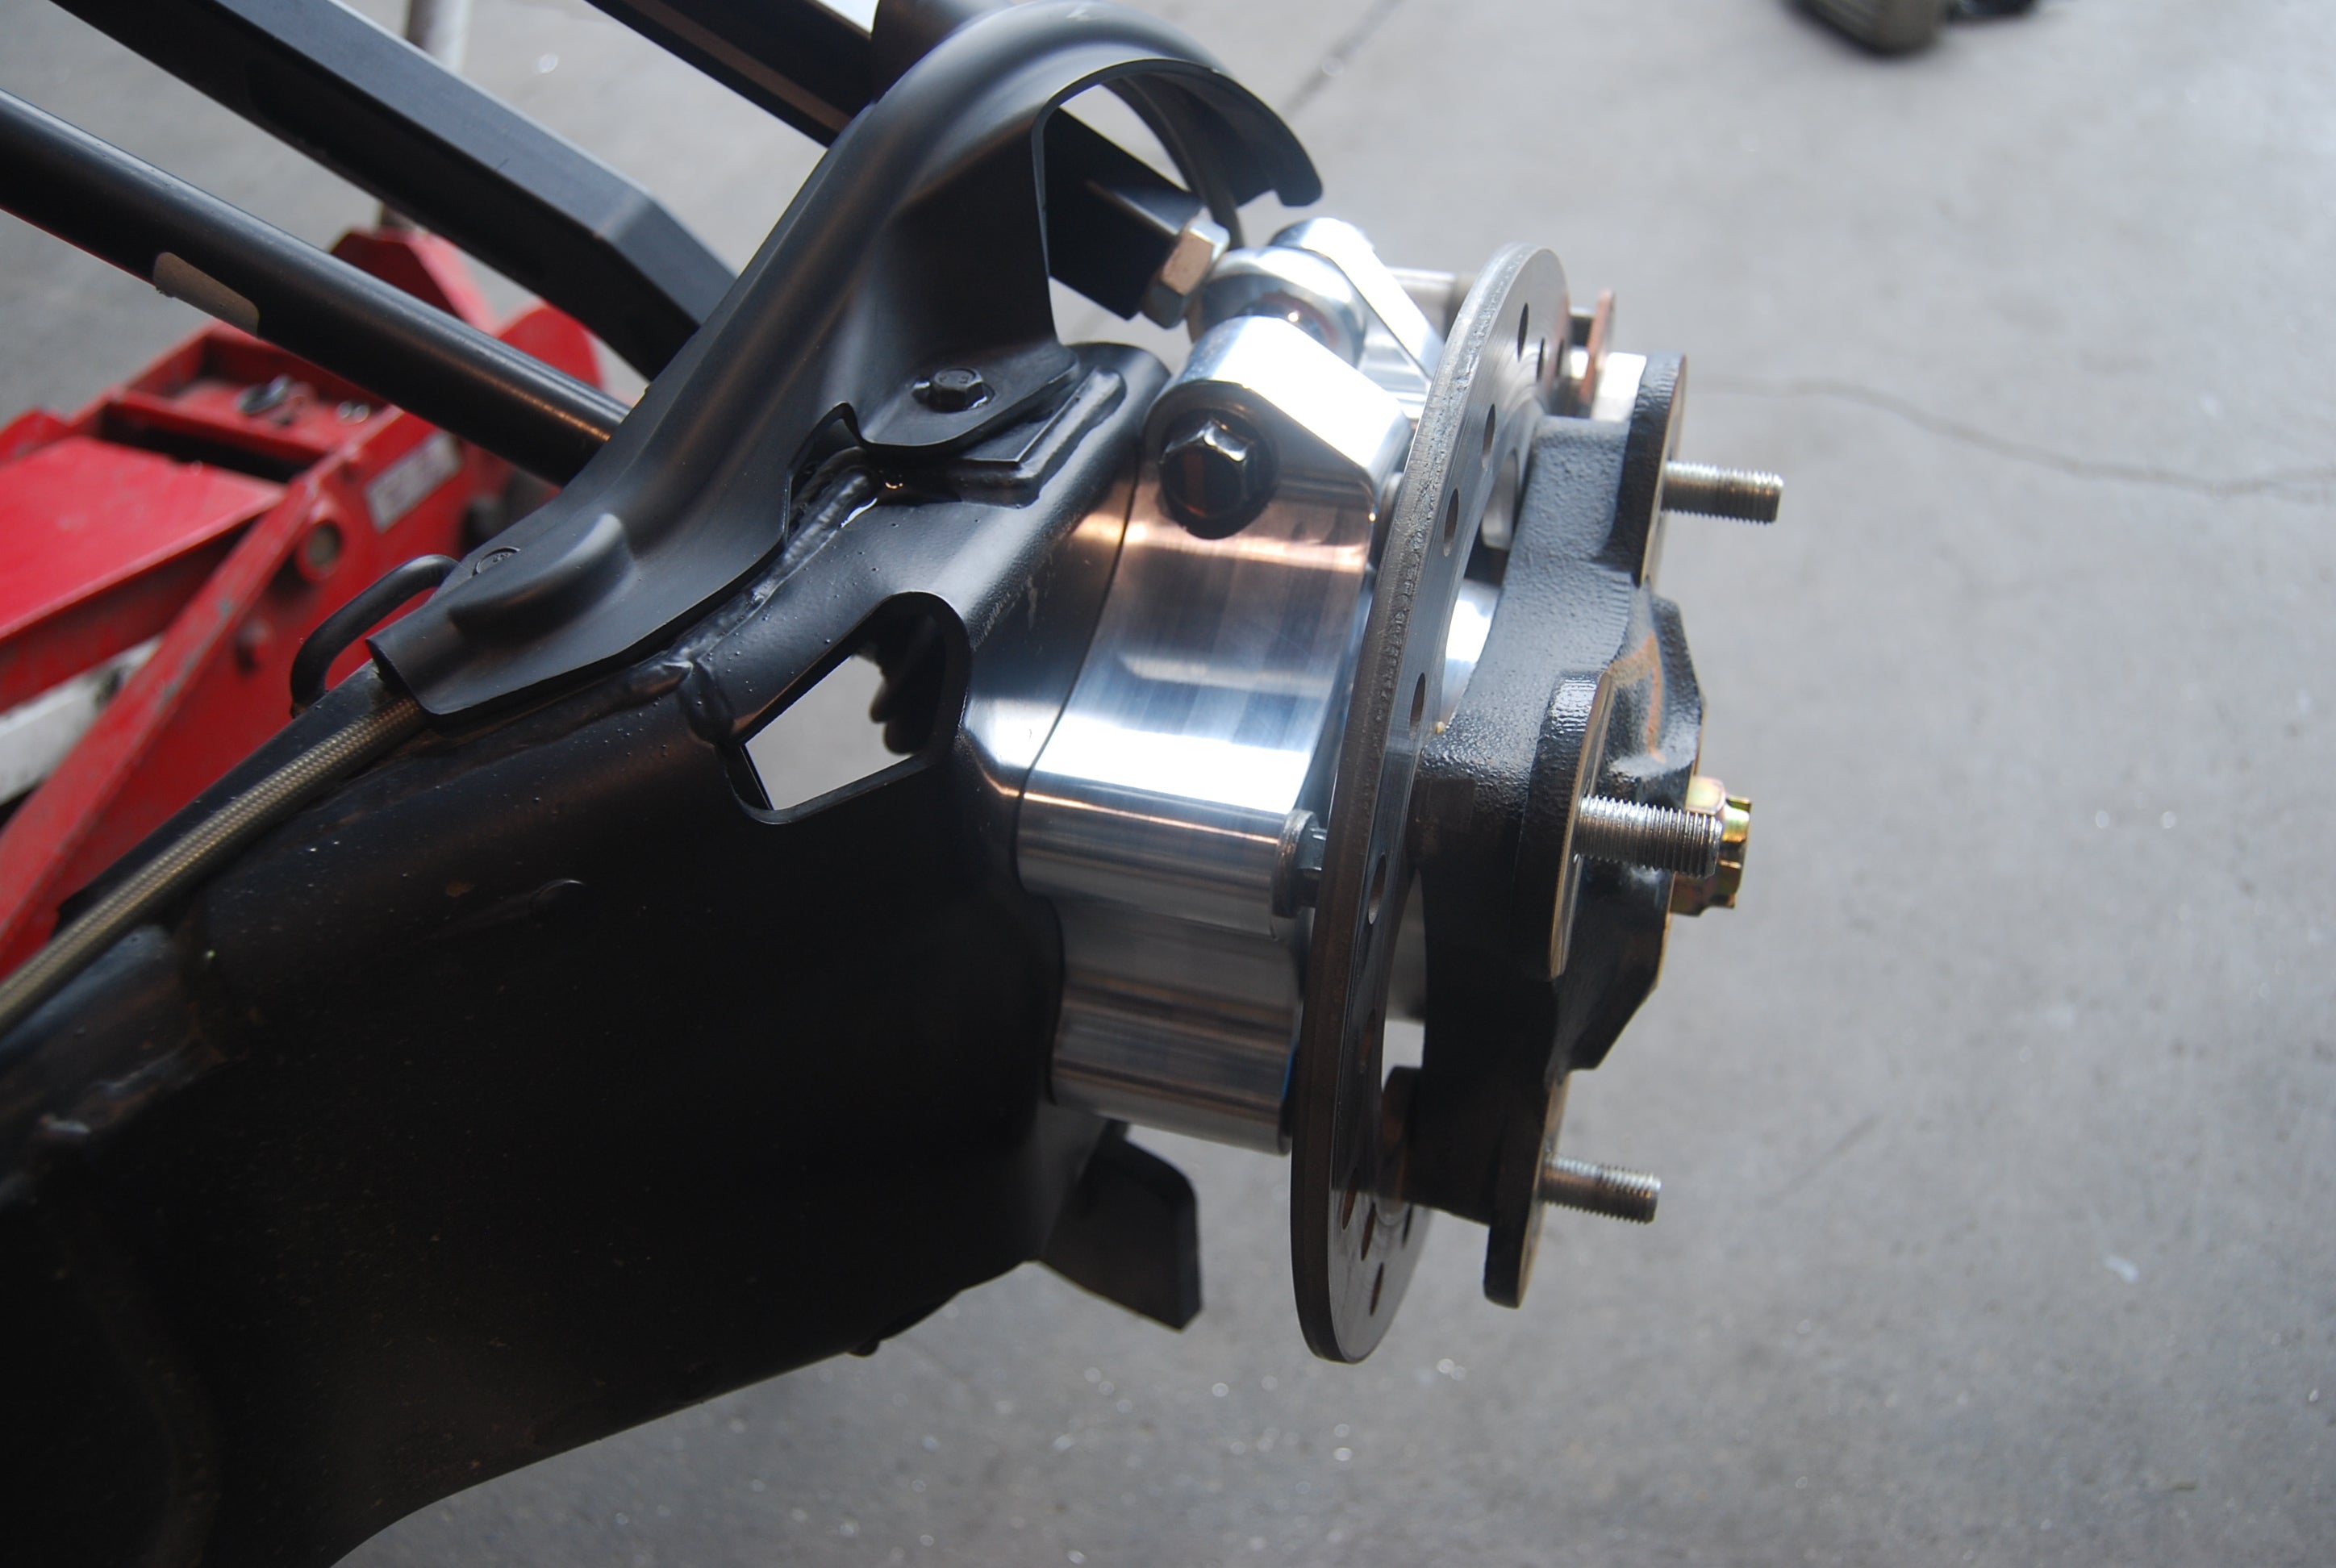 CAPPED RZR TURBO S POLARIS BILLET ALUMINUM SUSPENSION UPGRADE BEARING CARRIER KNUCKLE SPINDLE